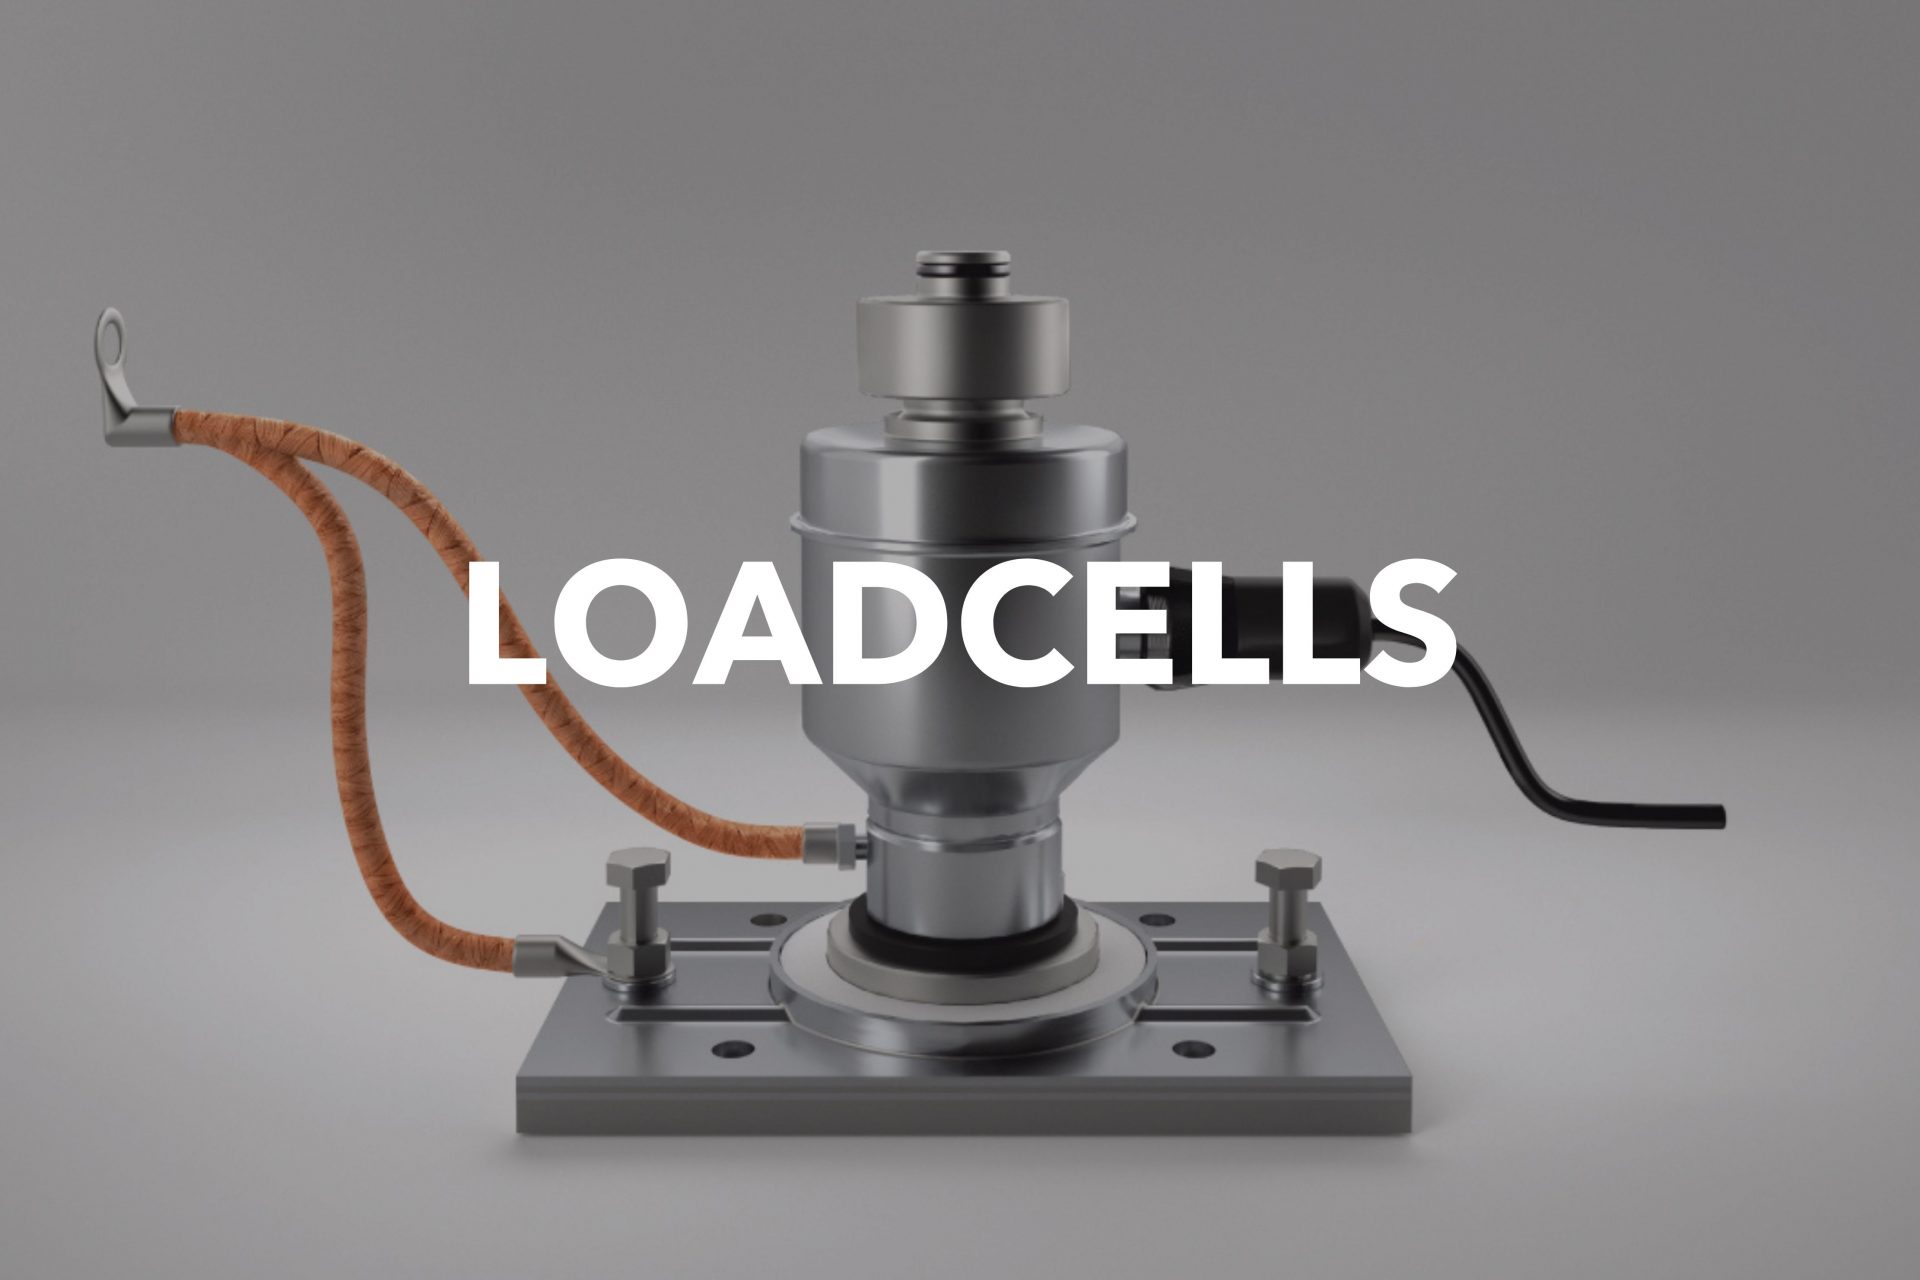 LOADCELLS CATEGORY